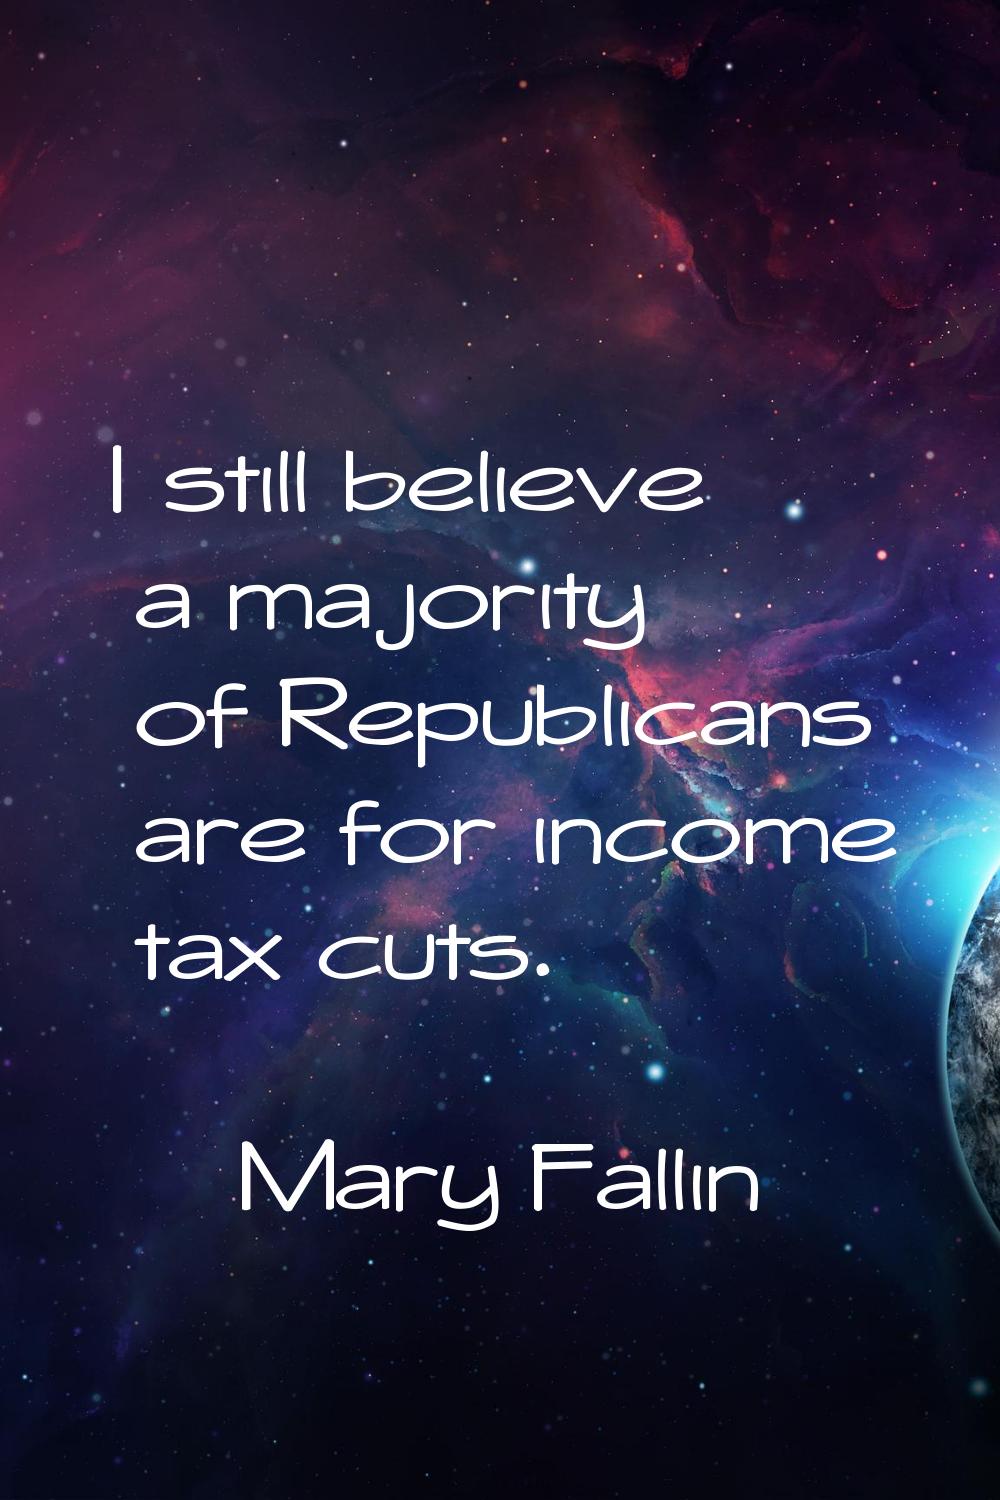 I still believe a majority of Republicans are for income tax cuts.